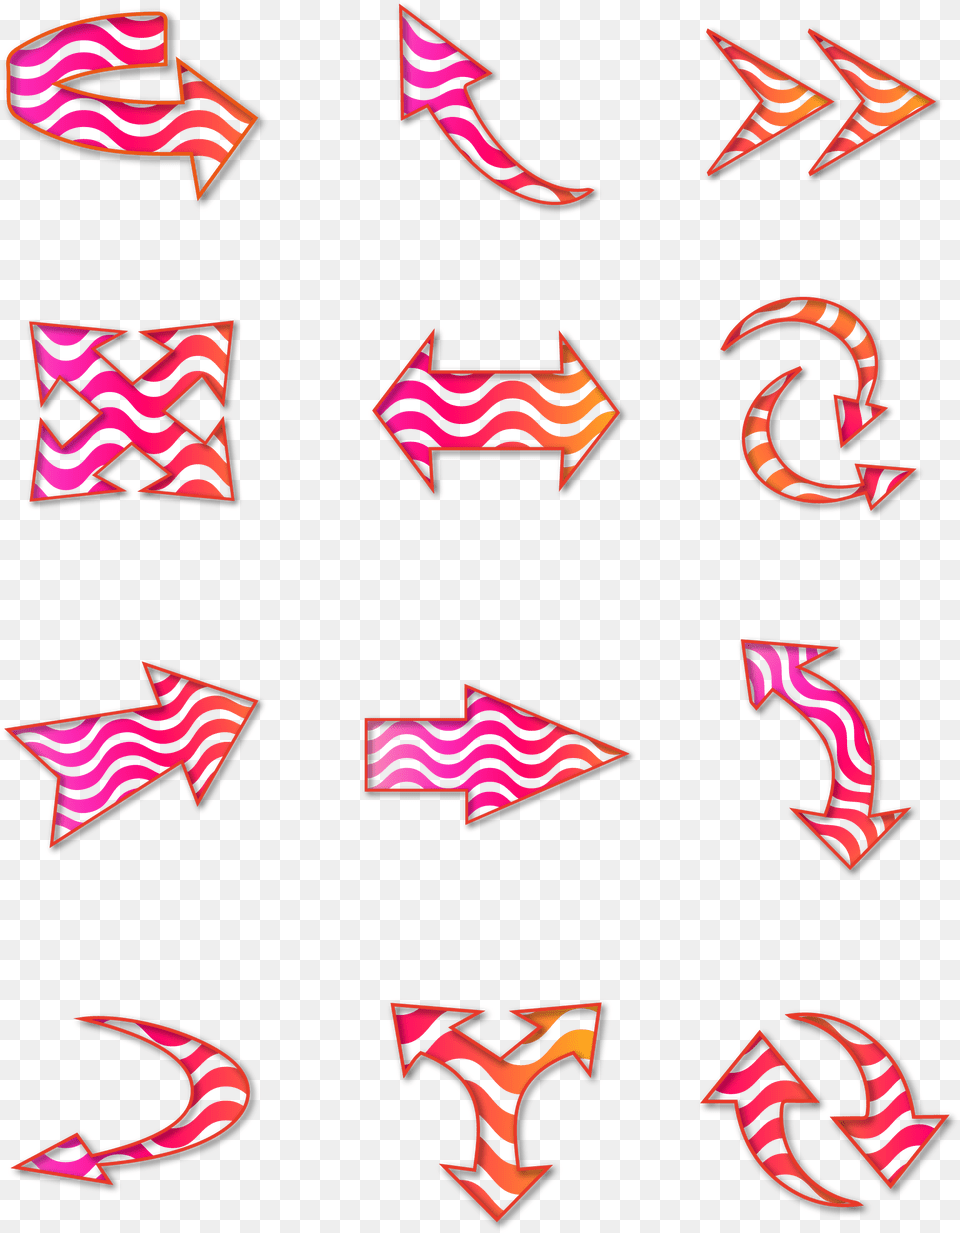 Arrow Element Icon Colorful Linear And Vector Image, Paper, Art Free Png Download